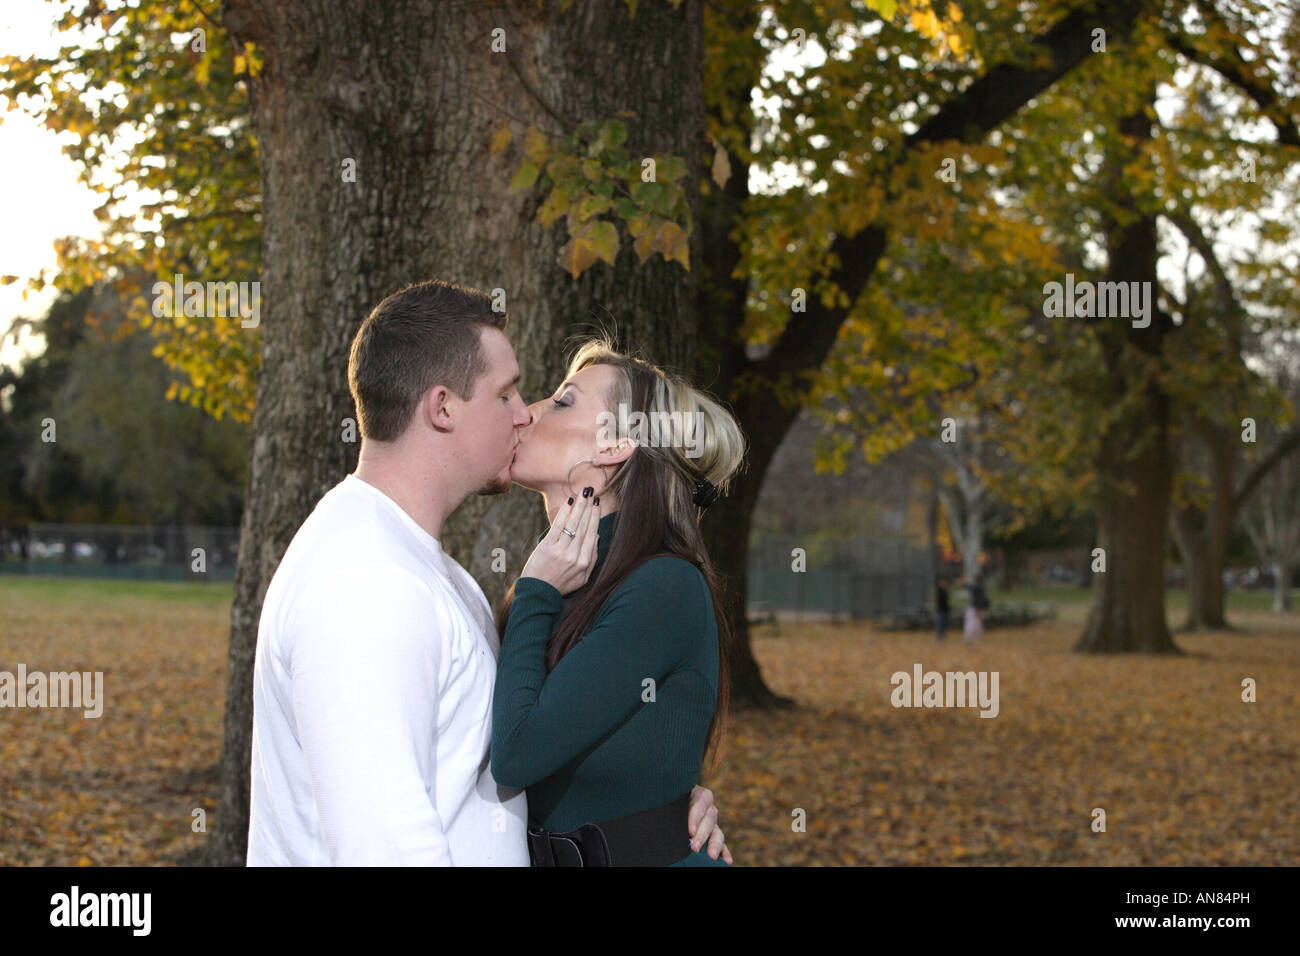 A husban kissing his wife young wife Stock Photo